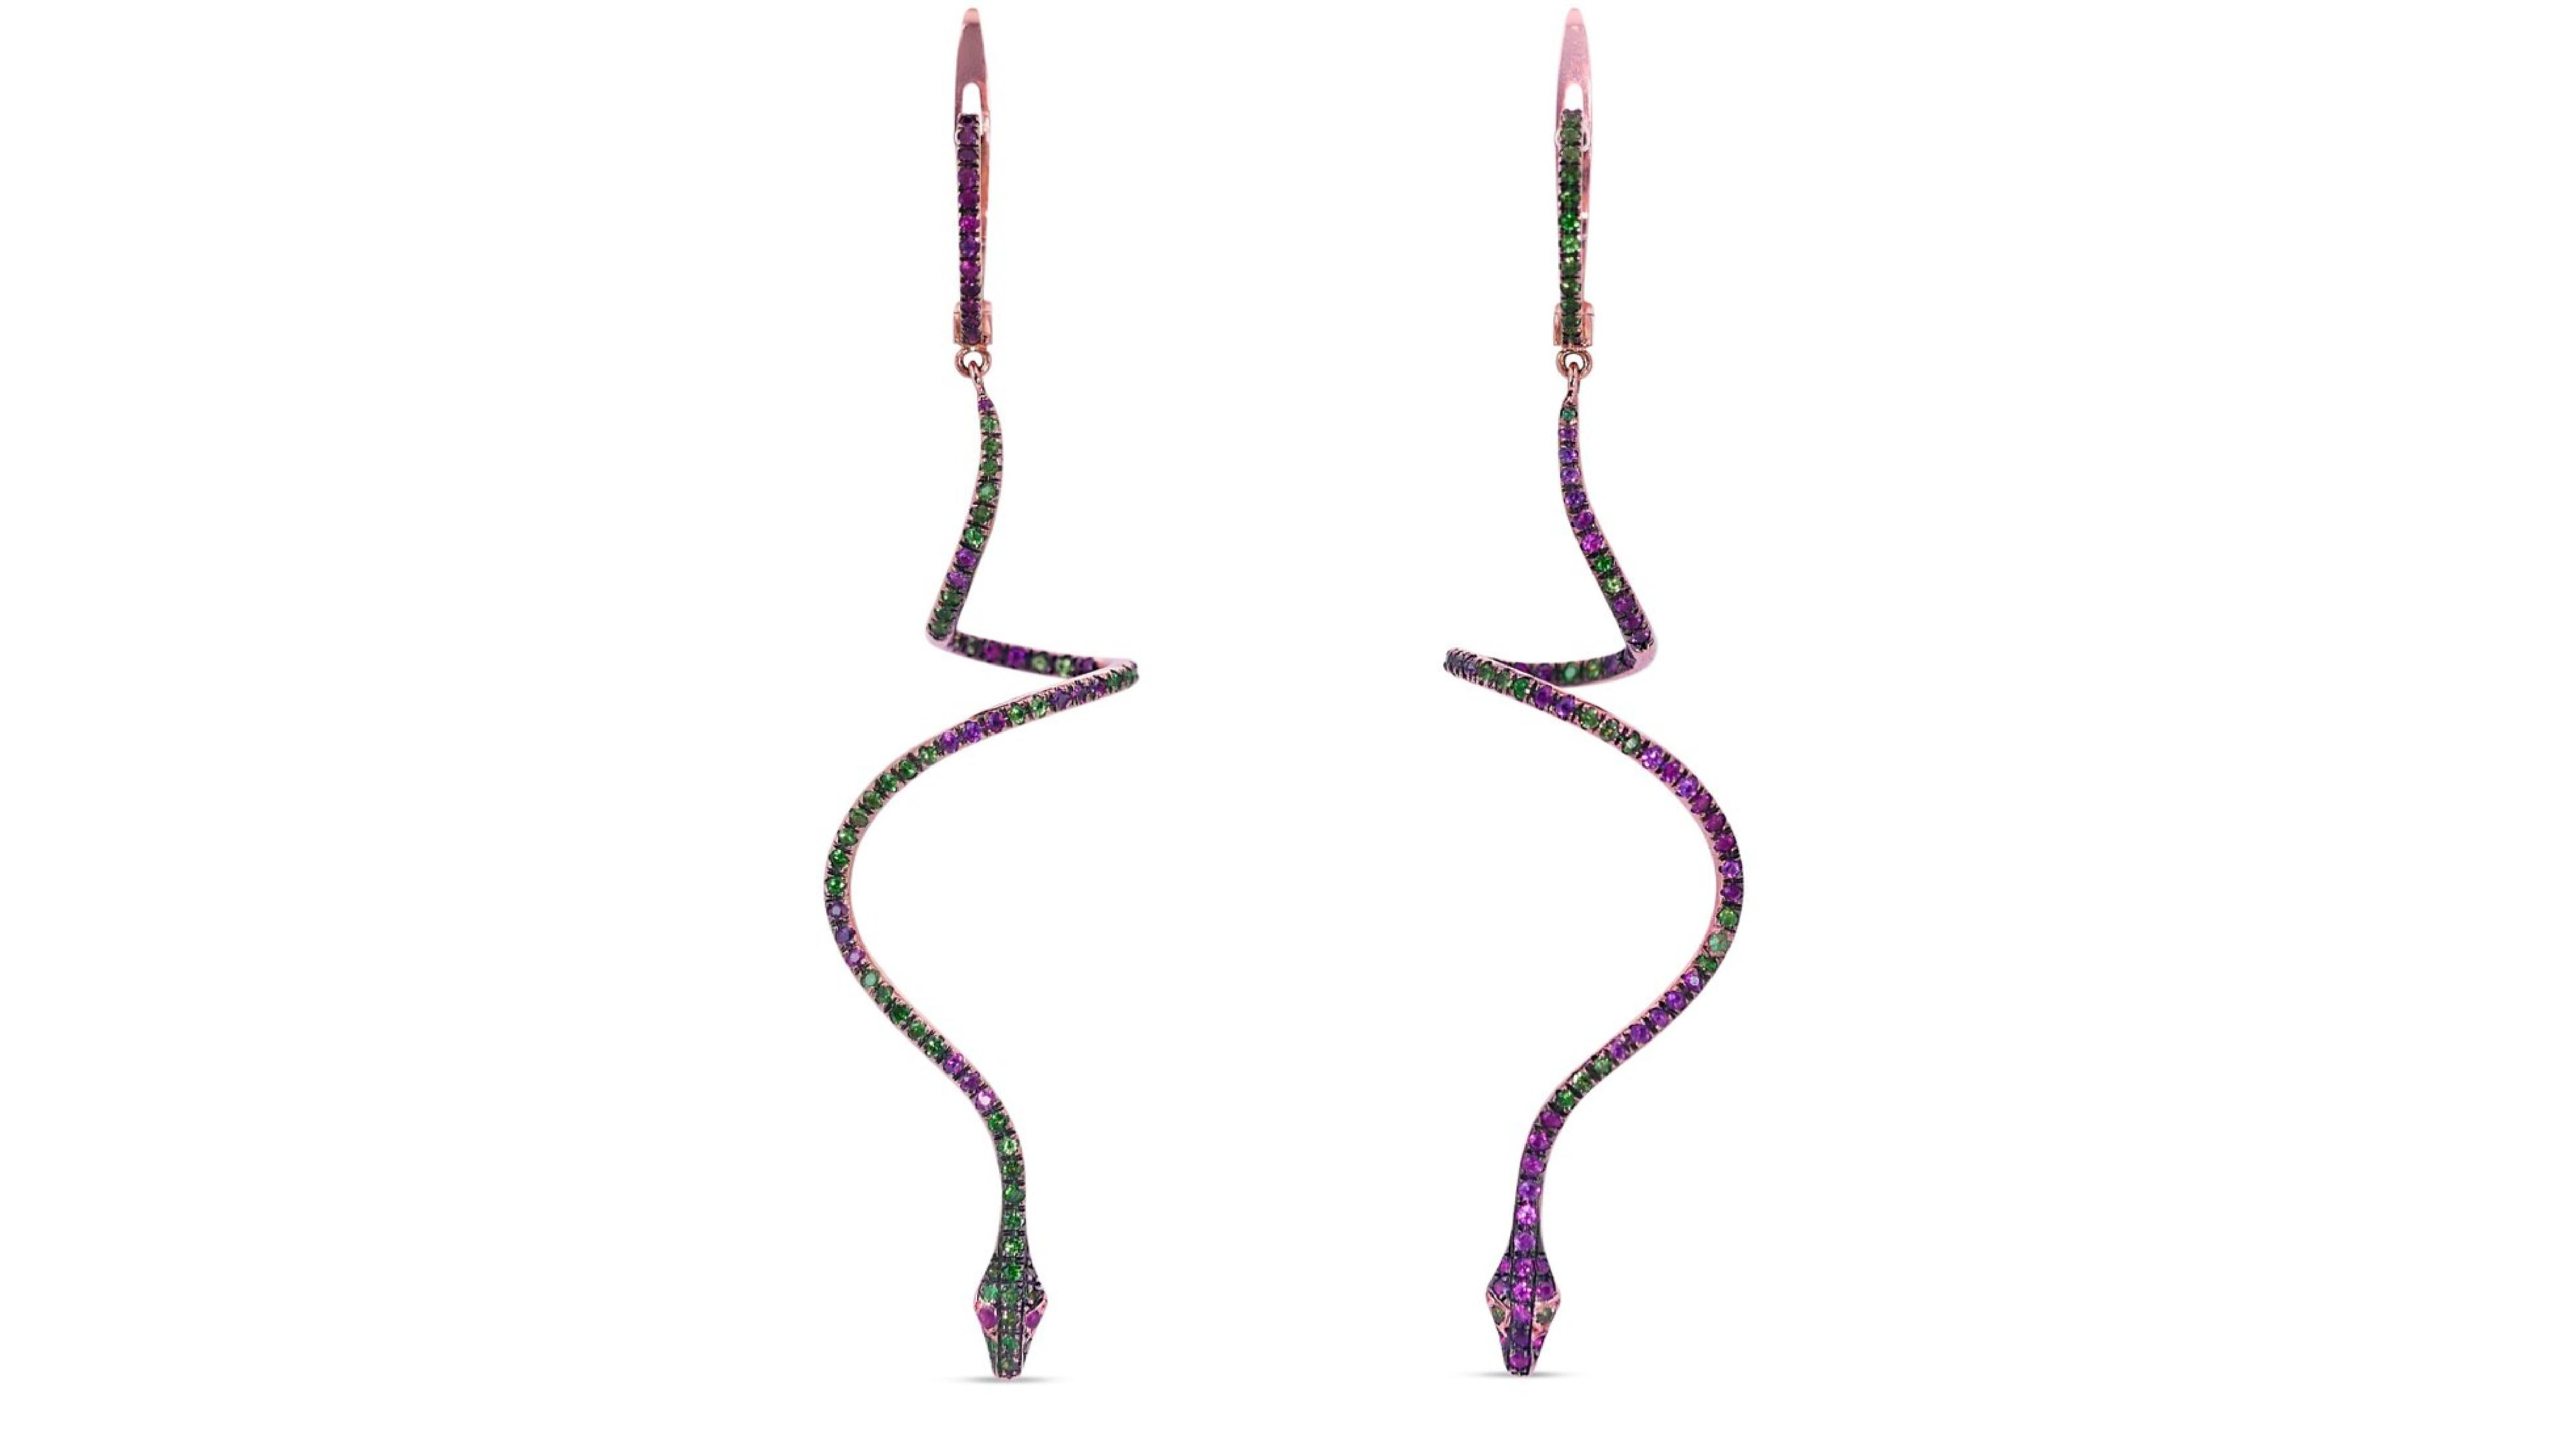 Glamorous 18k Pink Gold Earrings with 2.57 total carat of Natural Emerald and Ru 3